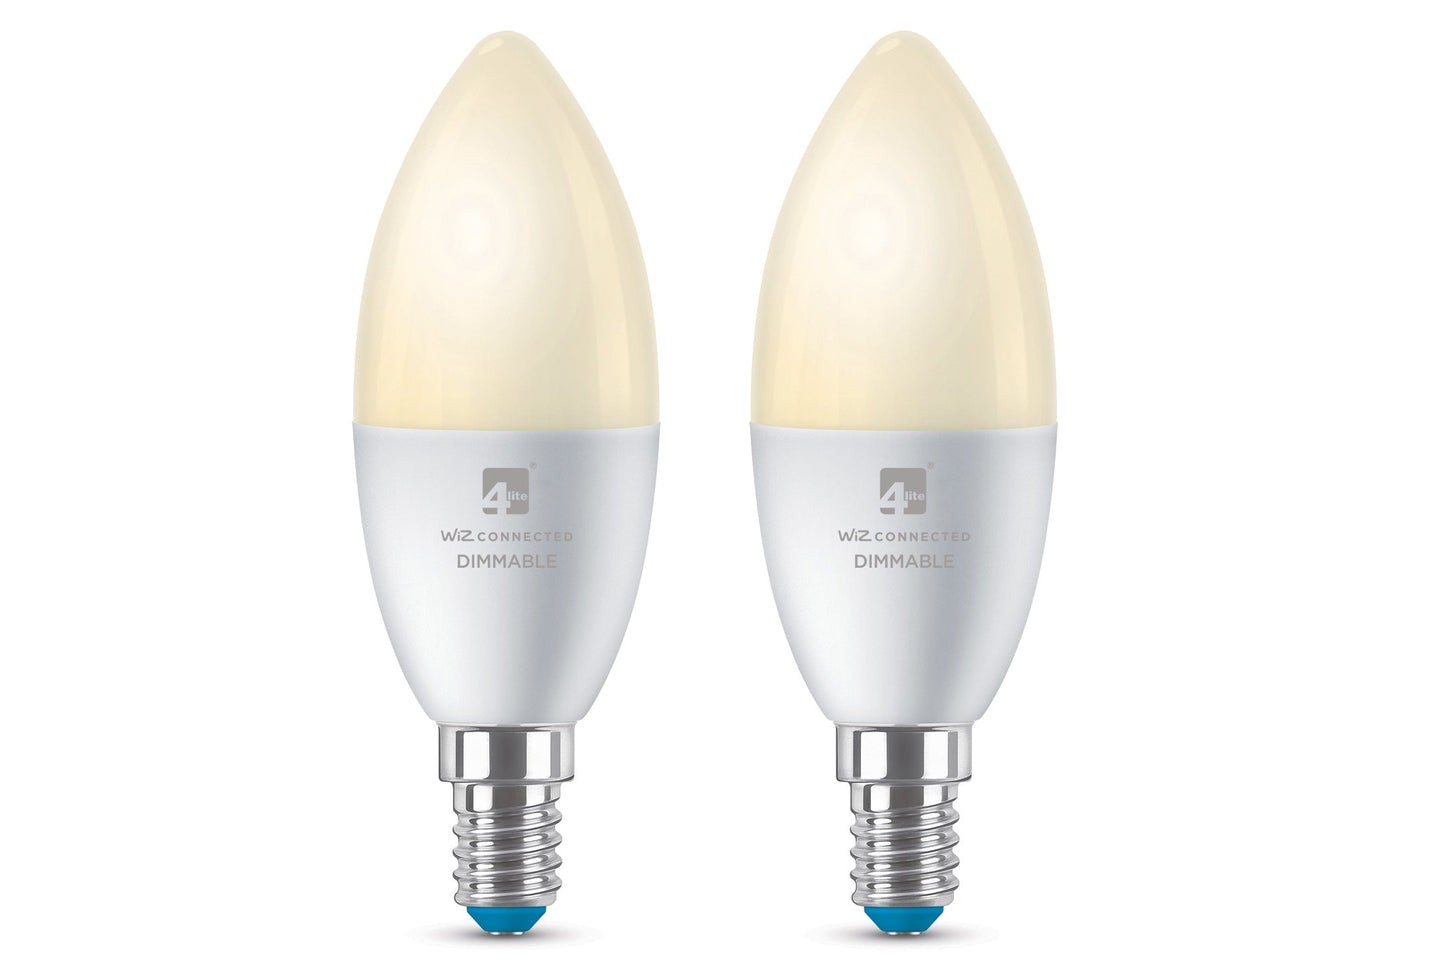 4lite WiZ Connected C37 Candle Dimmable Warm White WiFi LED Smart Bulb - E14 Small Screw - maplin.co.uk